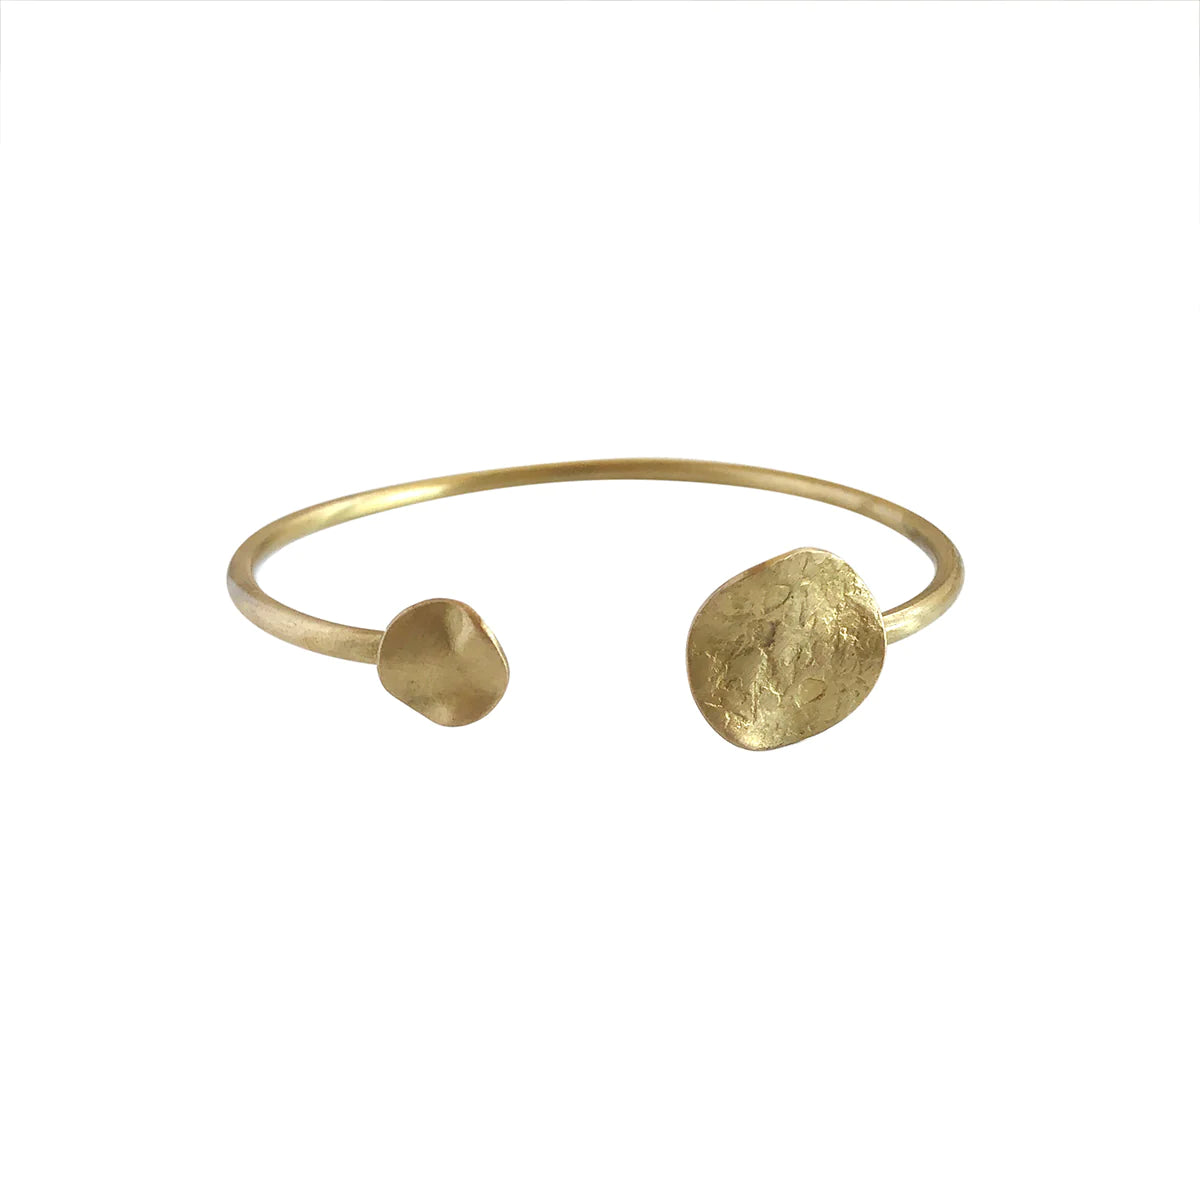 Angelco Accessories hammered coin cuff - gold - on white flatlay